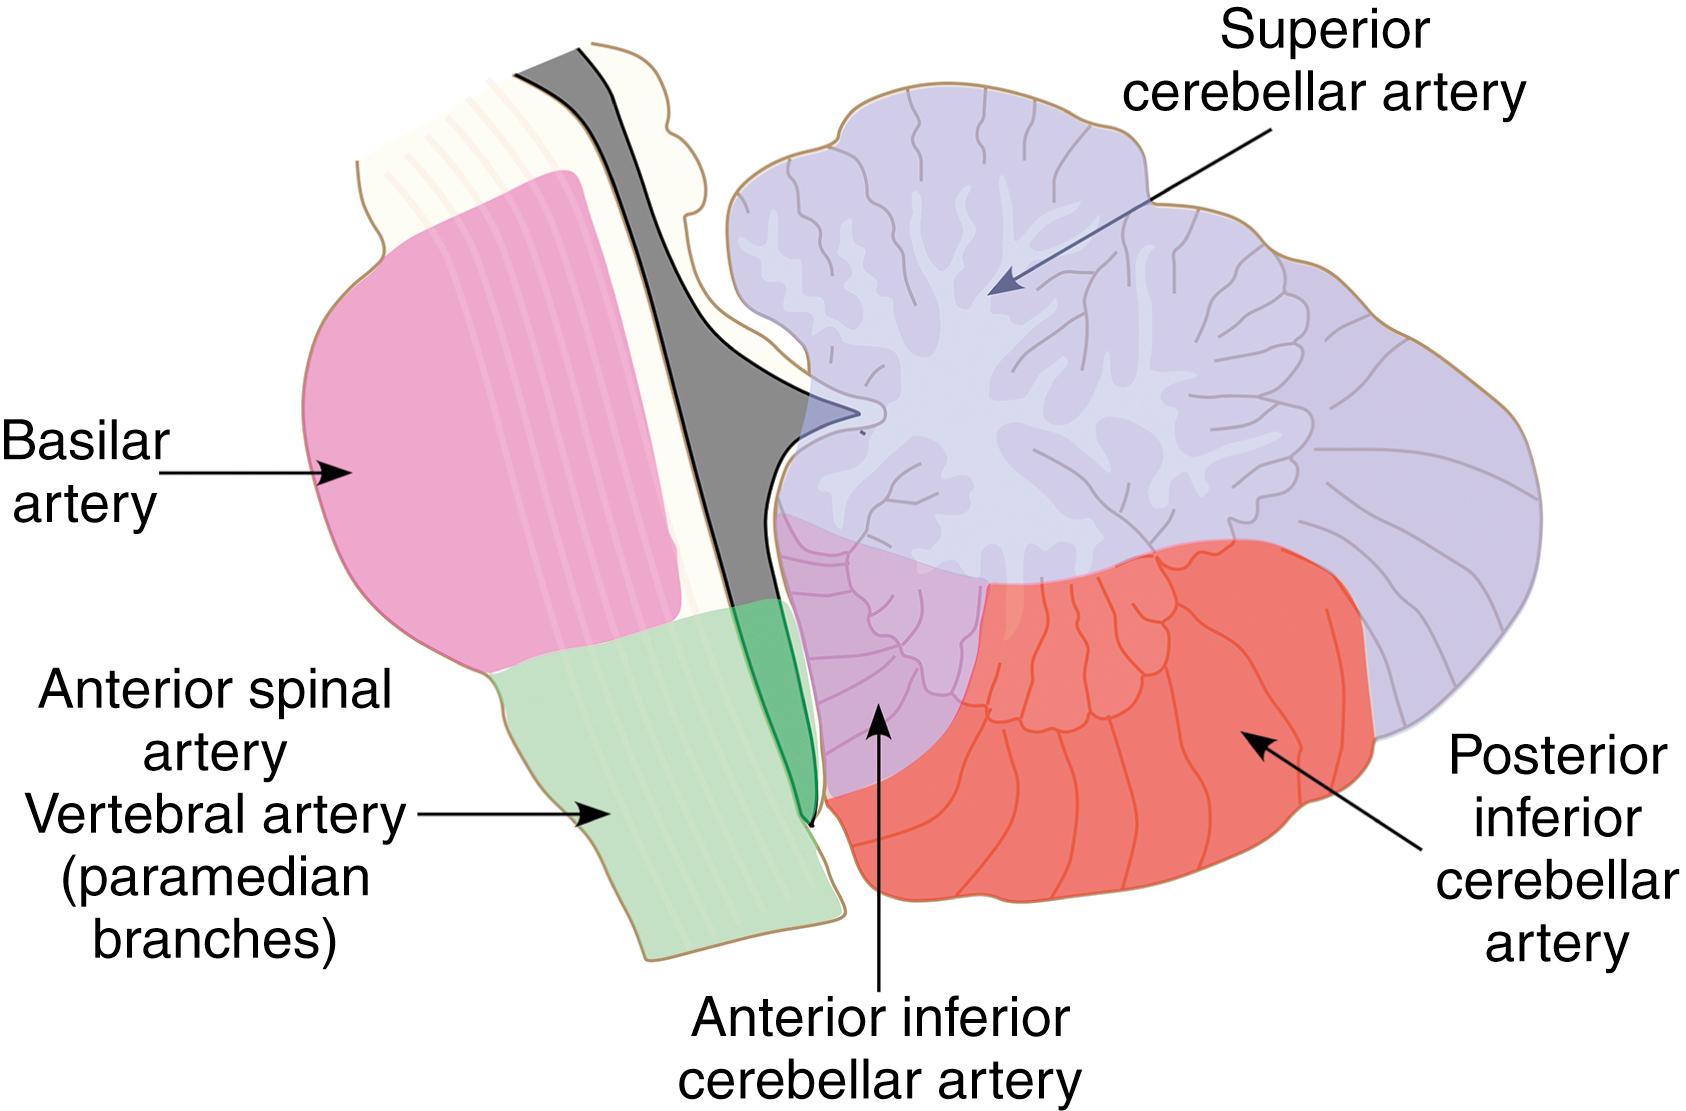 Fig. 37.4, Anatomic distribution of blood flow from major intracranial vessels in the cerebral hemispheres and infratentorial structures.